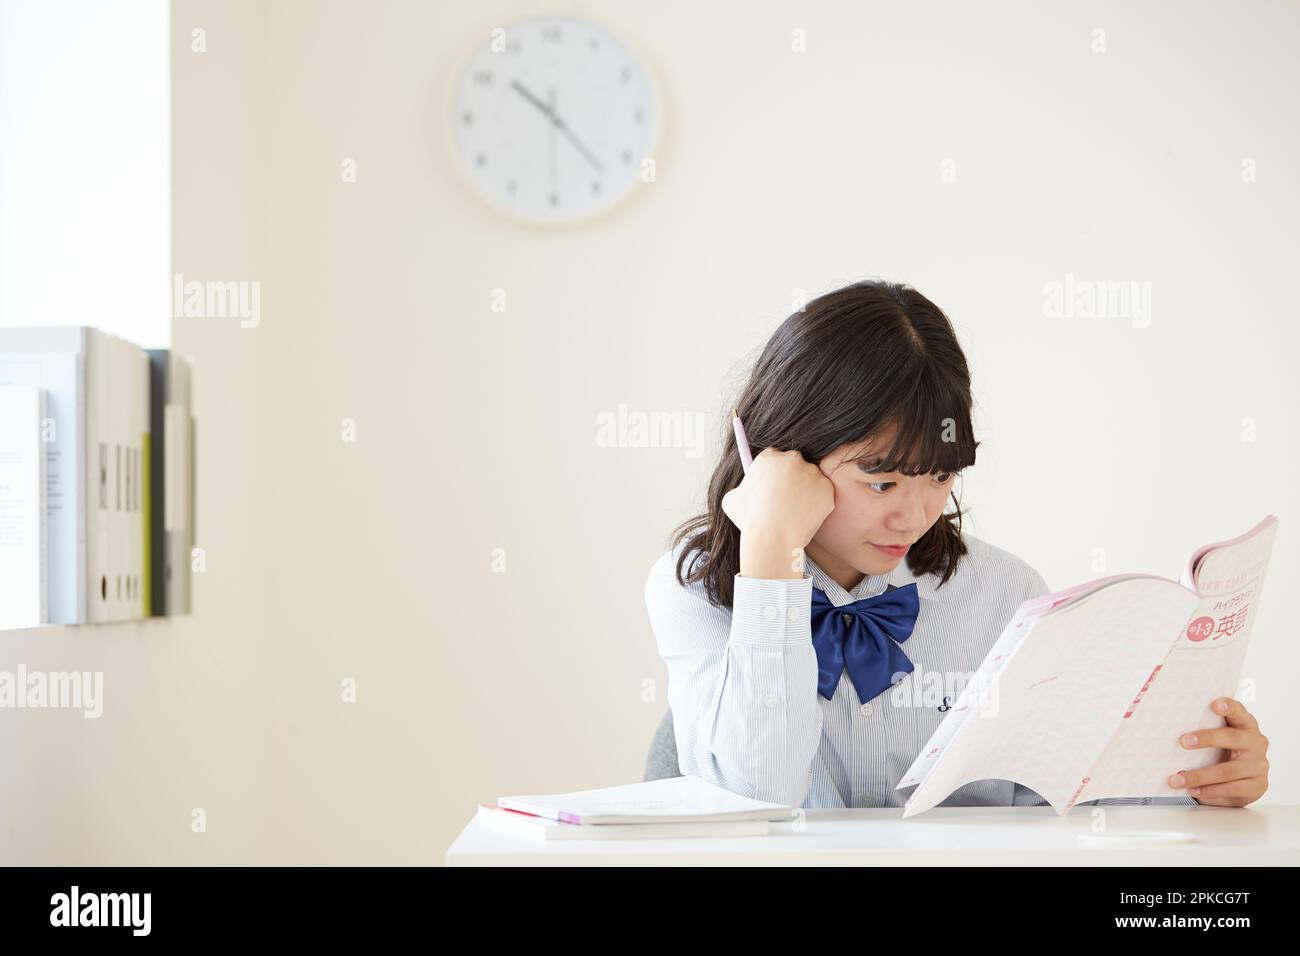 A high school girl thinking with a reference book open Stock Photo